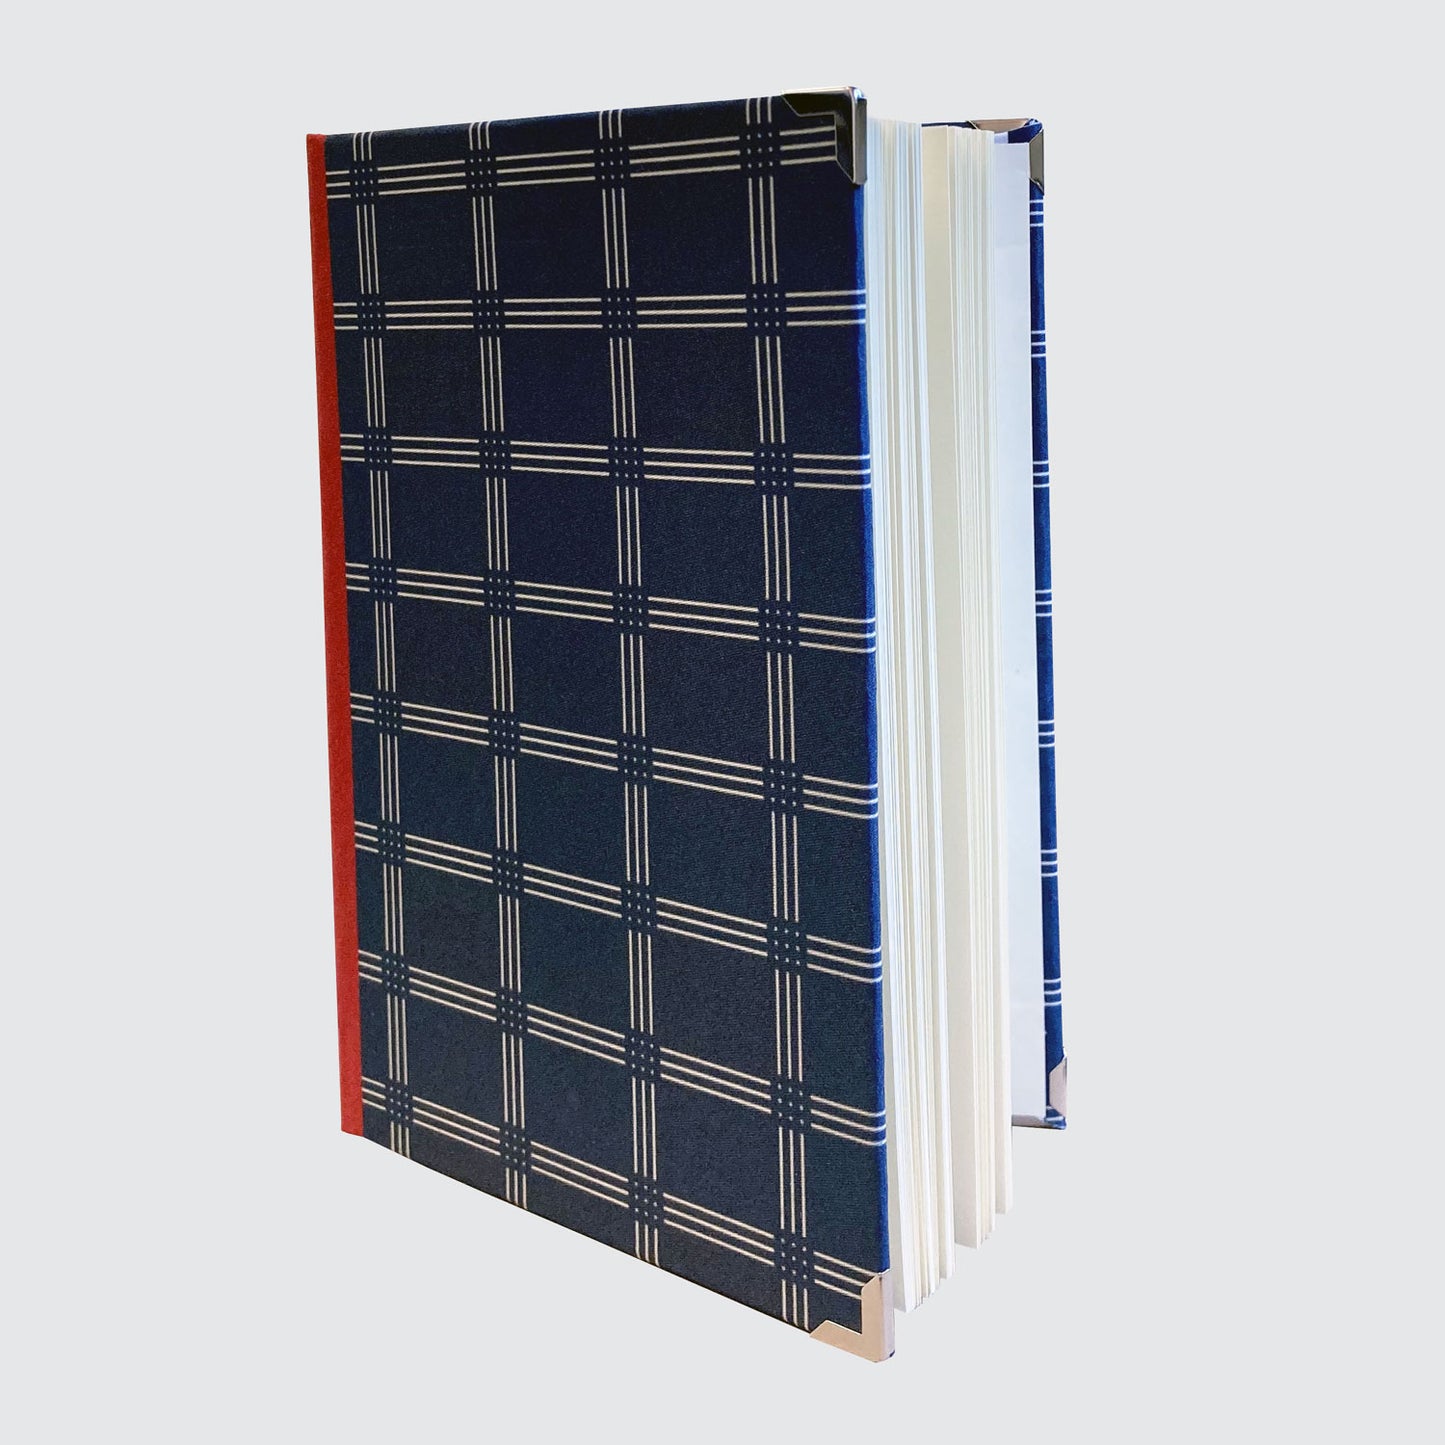 Journal - Hardback Notebook With Blank Pages - Navy With Gold Grid